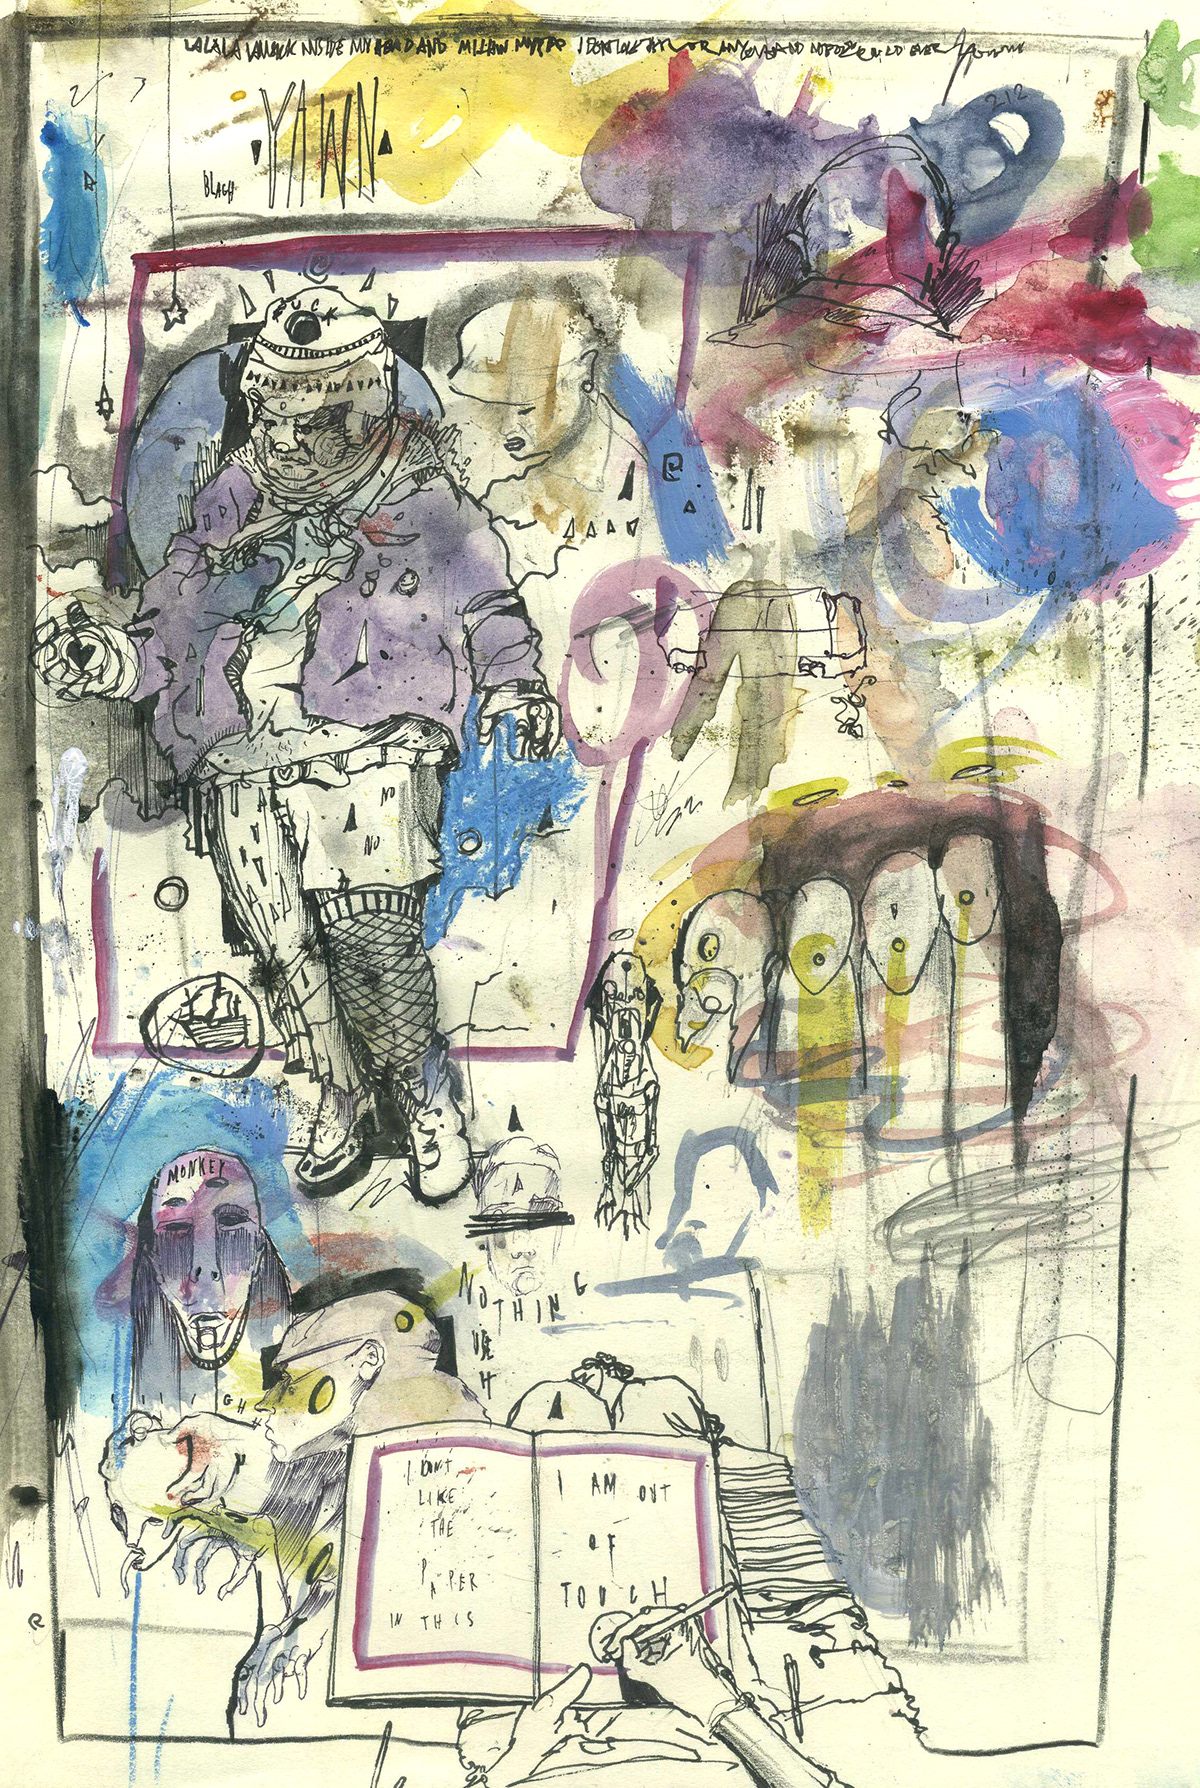 sketching sketchbook imagination dublin Ireland notebook mixed media Watercolours ink Fineliners observation